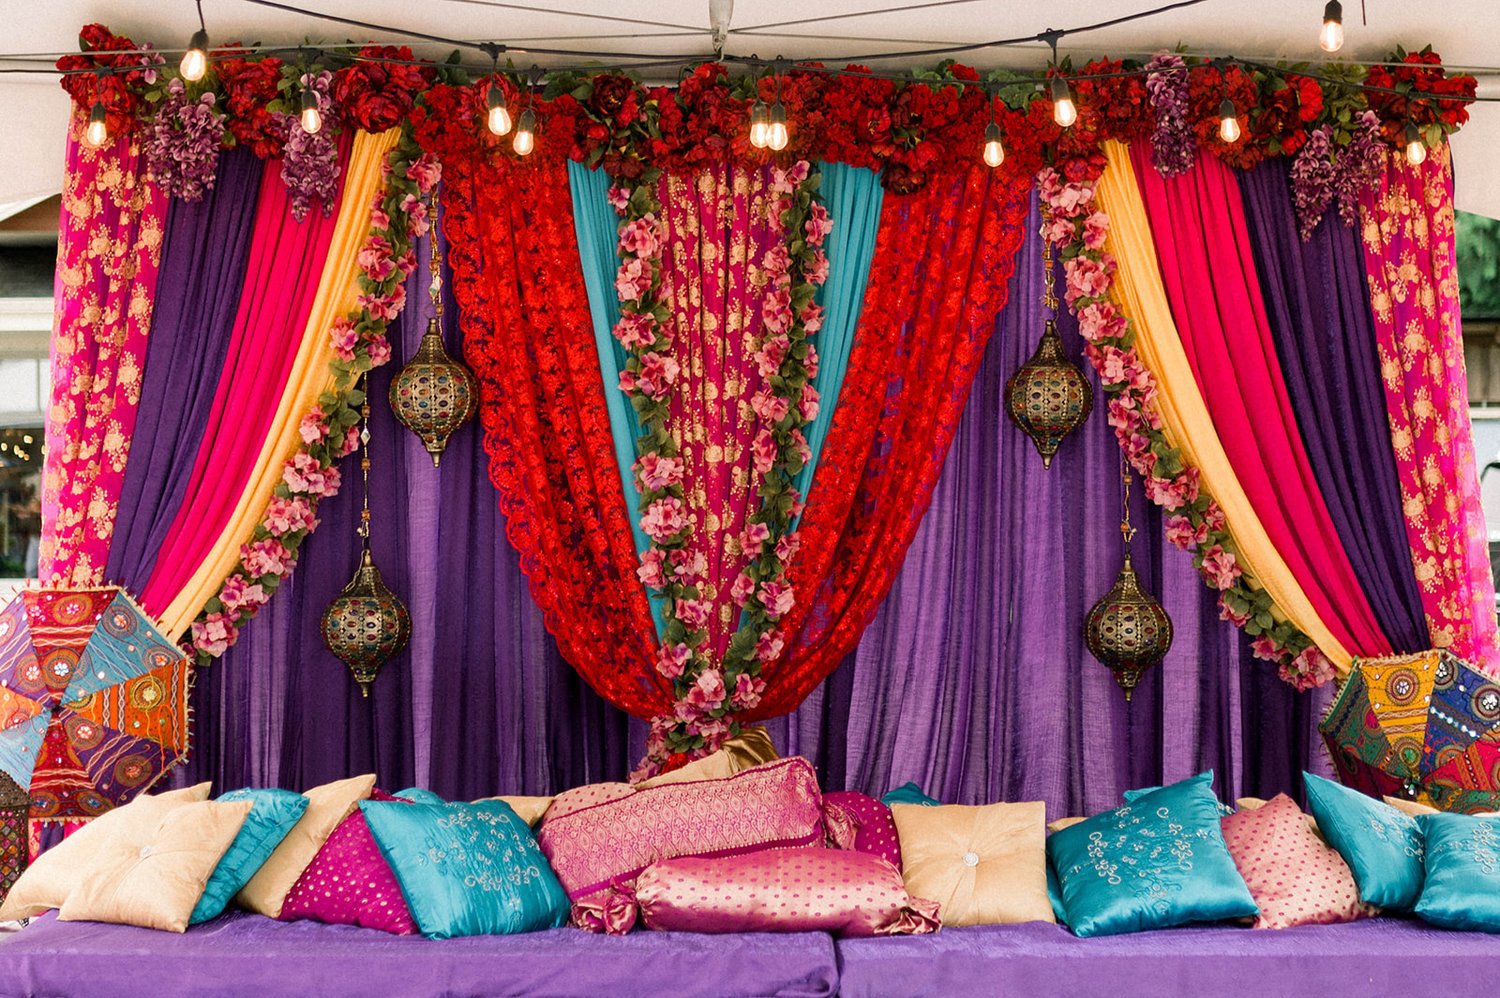 Jewel encrusted lanterns hand between colorful curtains and flowers behind a purple stage covered in silky bright pillows at Sikh Wedding.